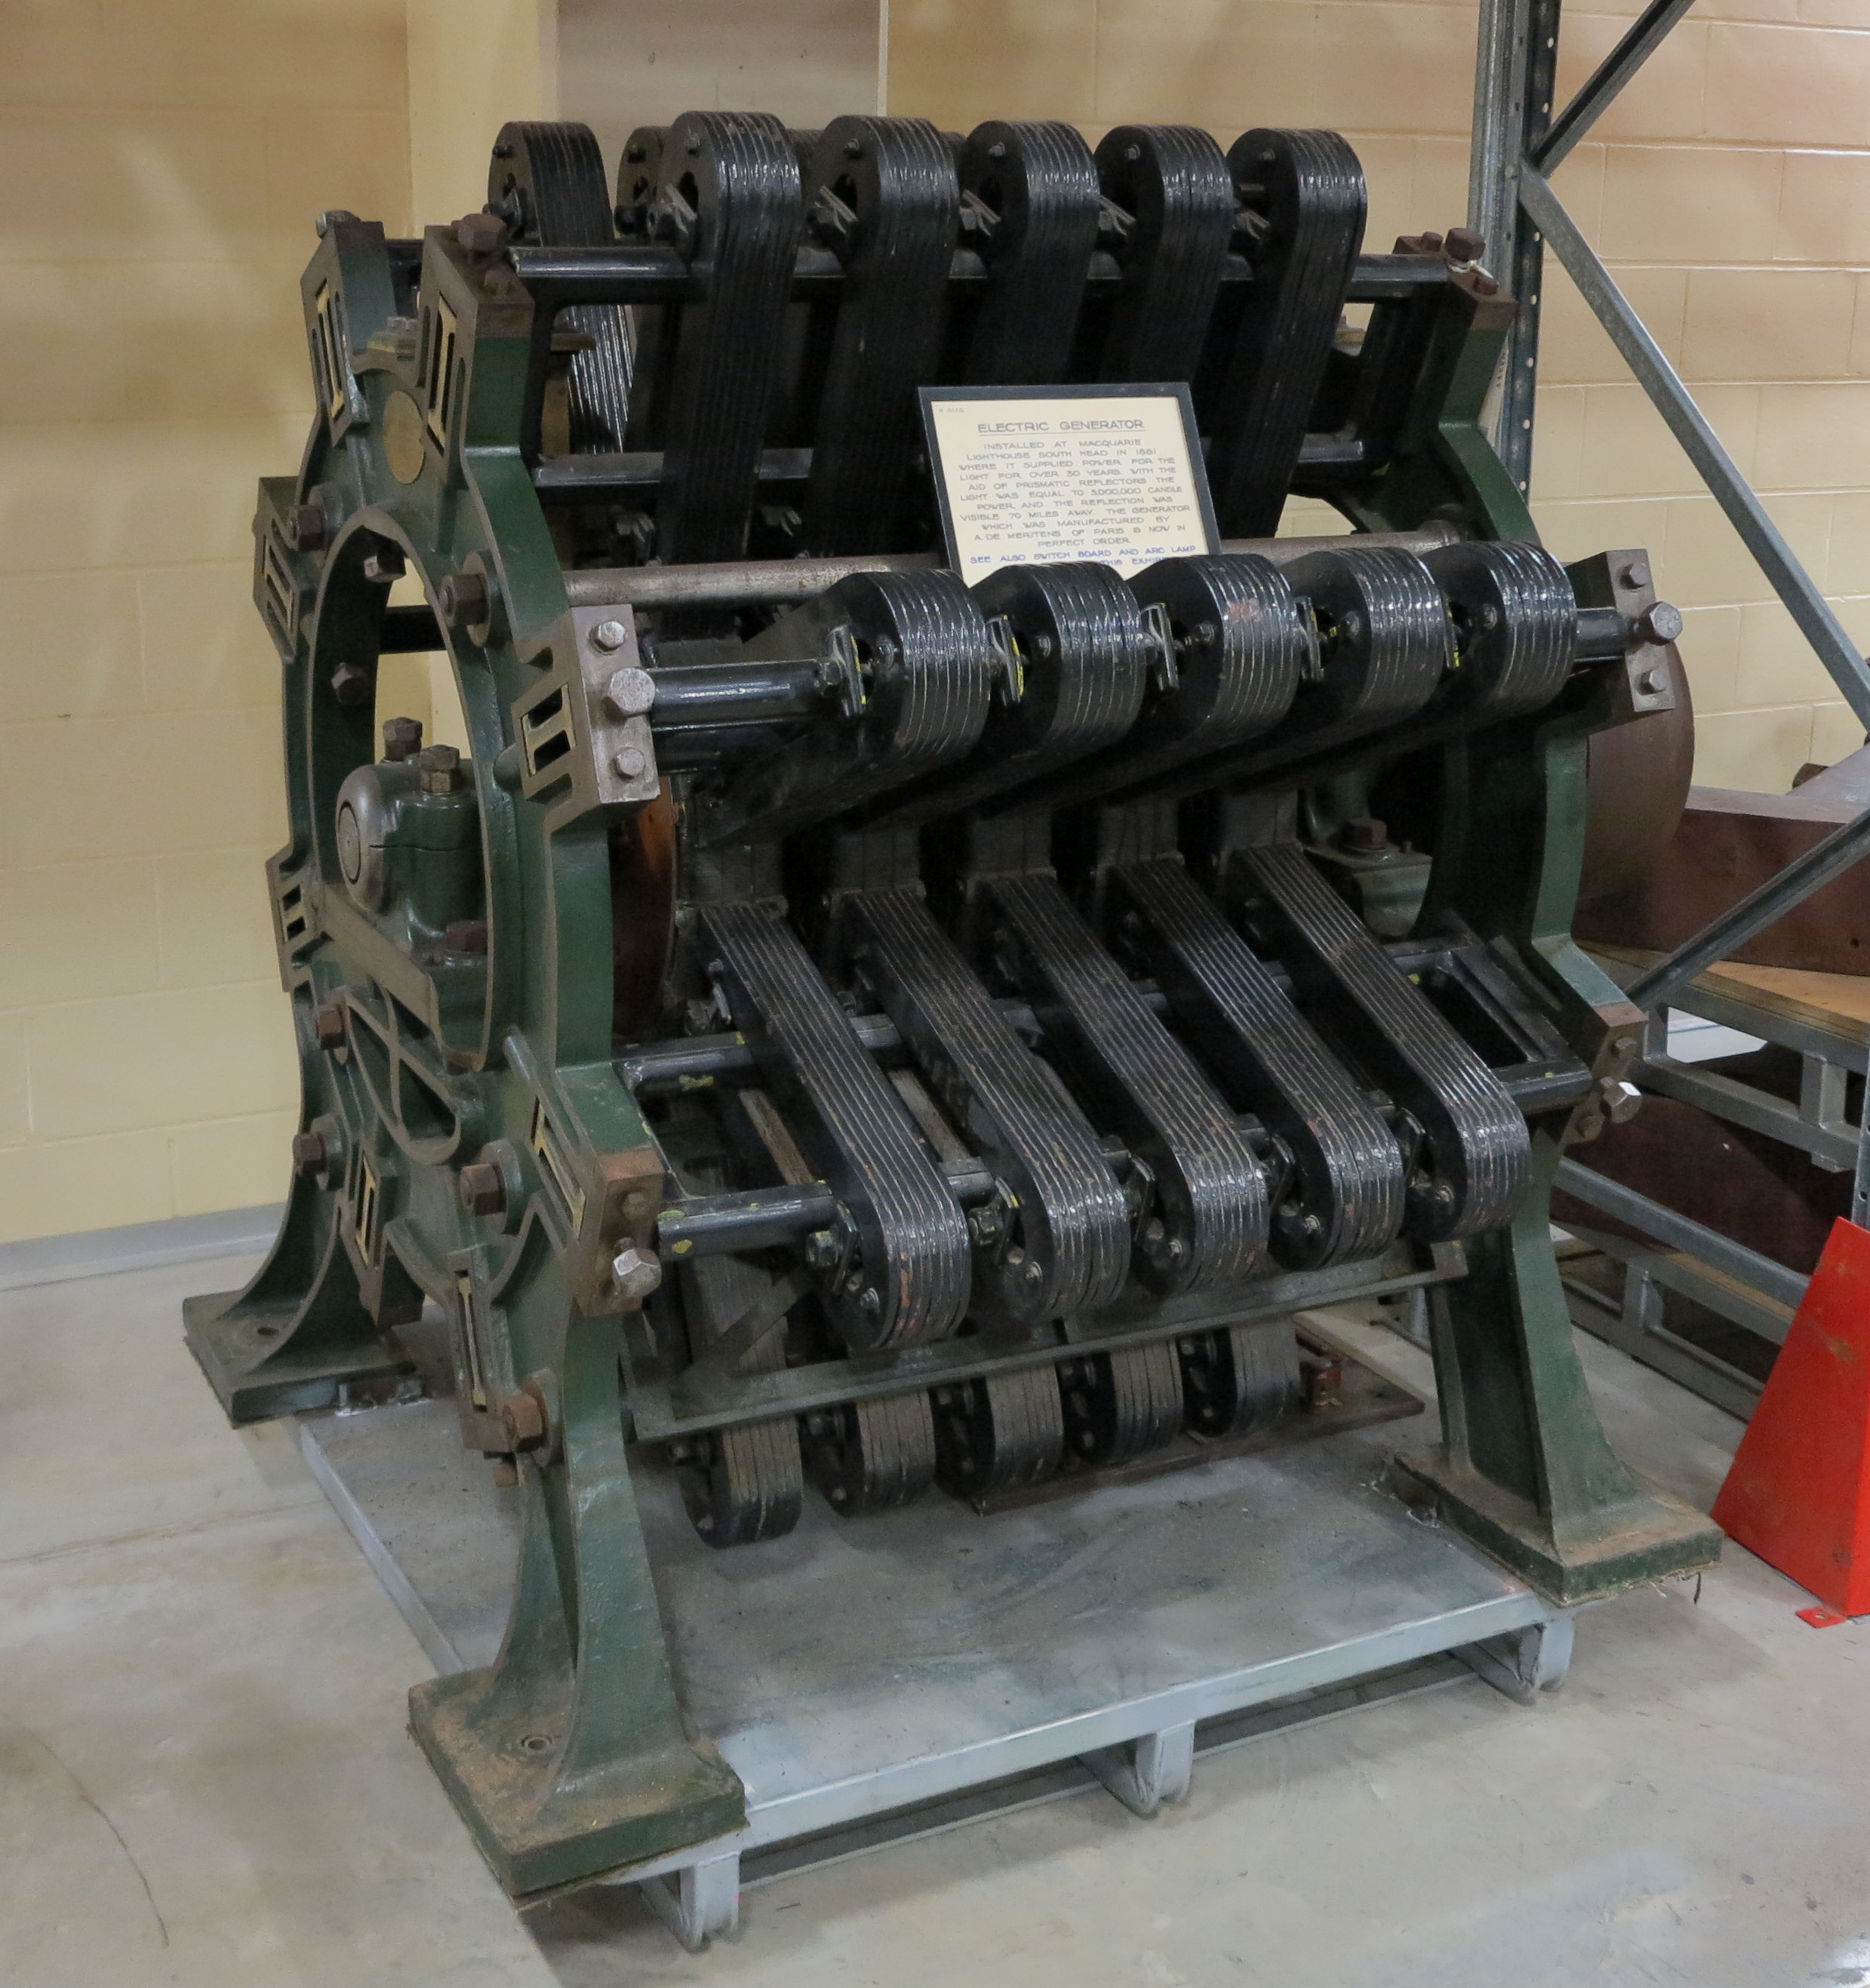 Electricity generator used at Macquarie Lighthouse